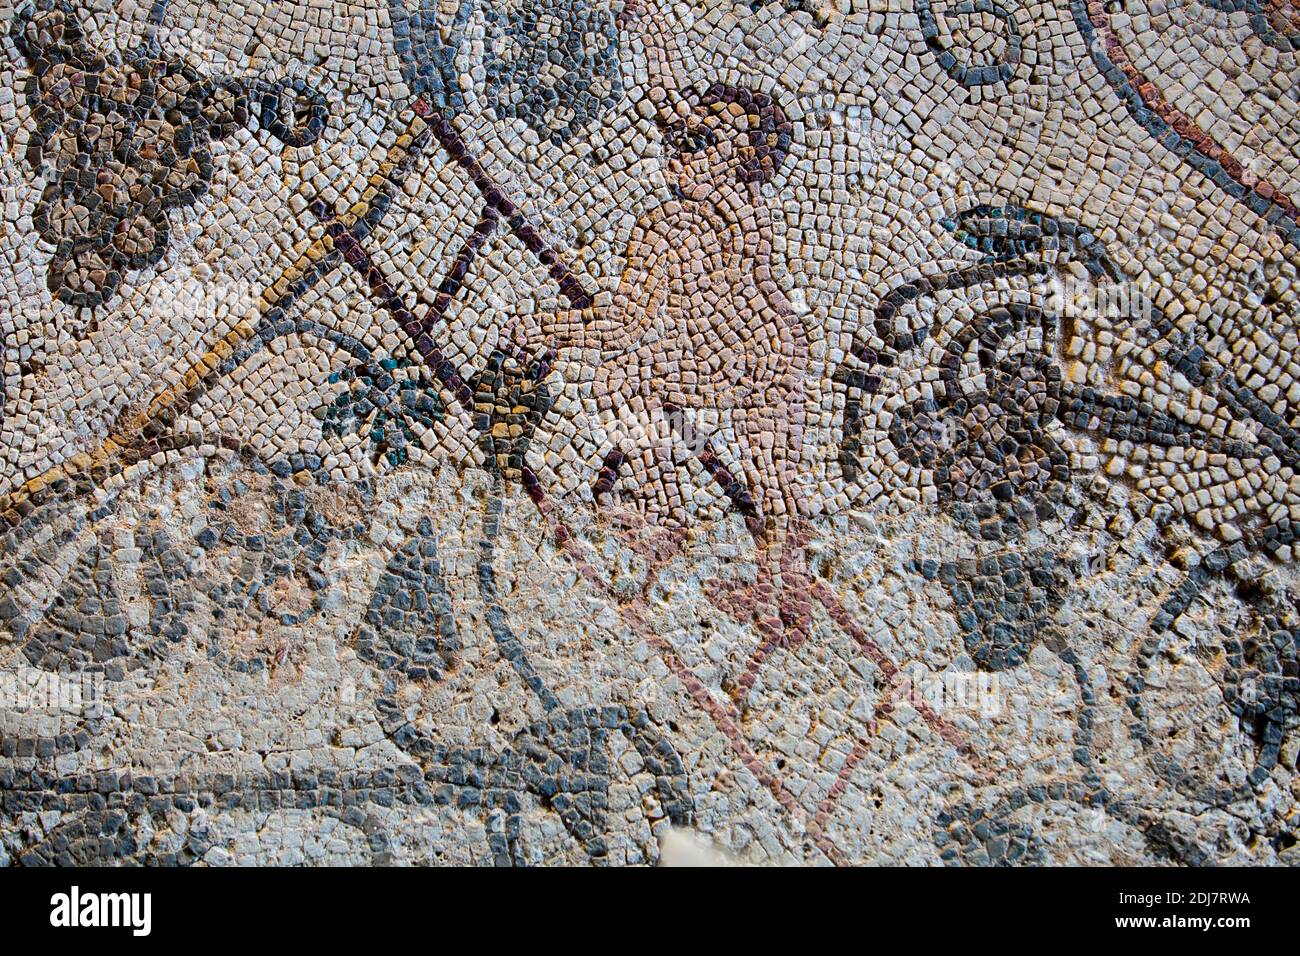 Merida, Spain - December 13th, 2020: Autumn mosaic. Unclothed children climbing the stairs and carrying baskets of grapes. Amphitheatre House,  Merida Stock Photo